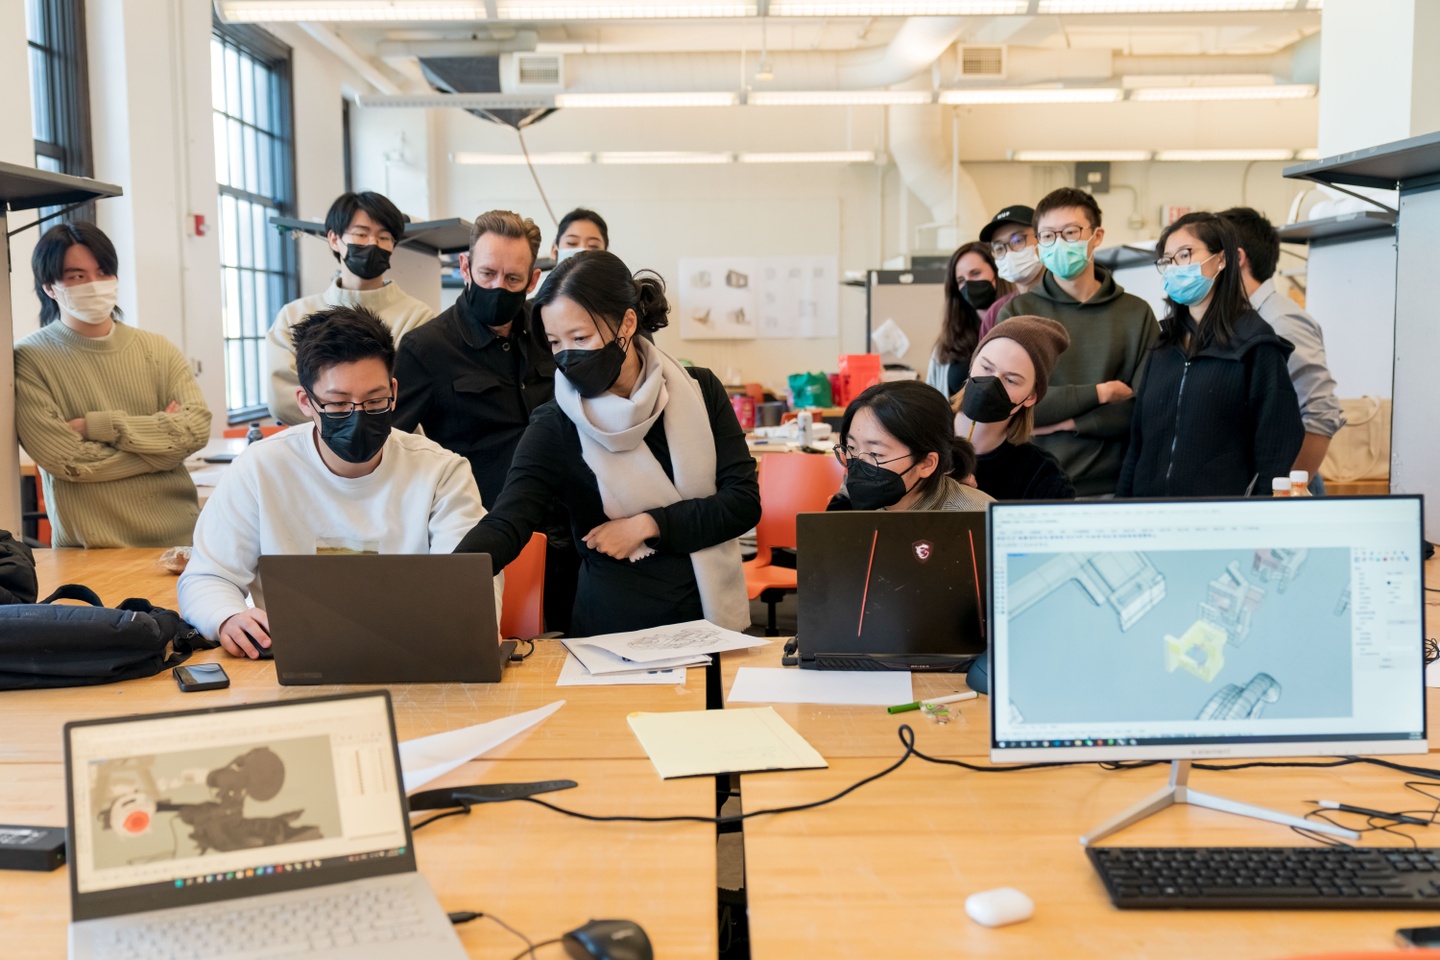 A group of students and faculty is gathered in an open studio space, looking at something on a student's computer screen. In the foreground of the photos are two computer screens, each with an architectural rendering.